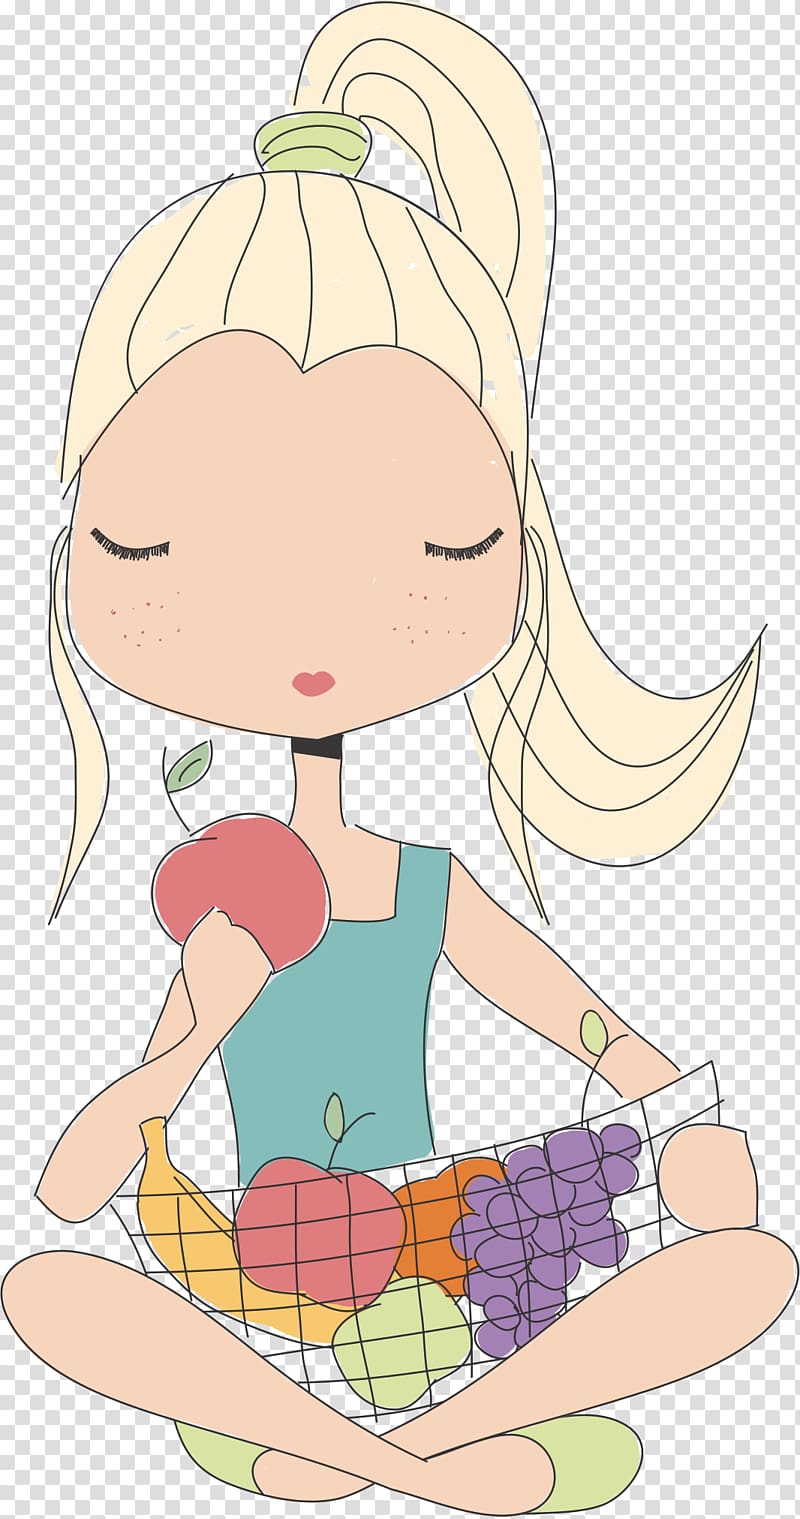 Eating Food Healthy diet Illustration, Cartoon child health transparent background PNG clipart